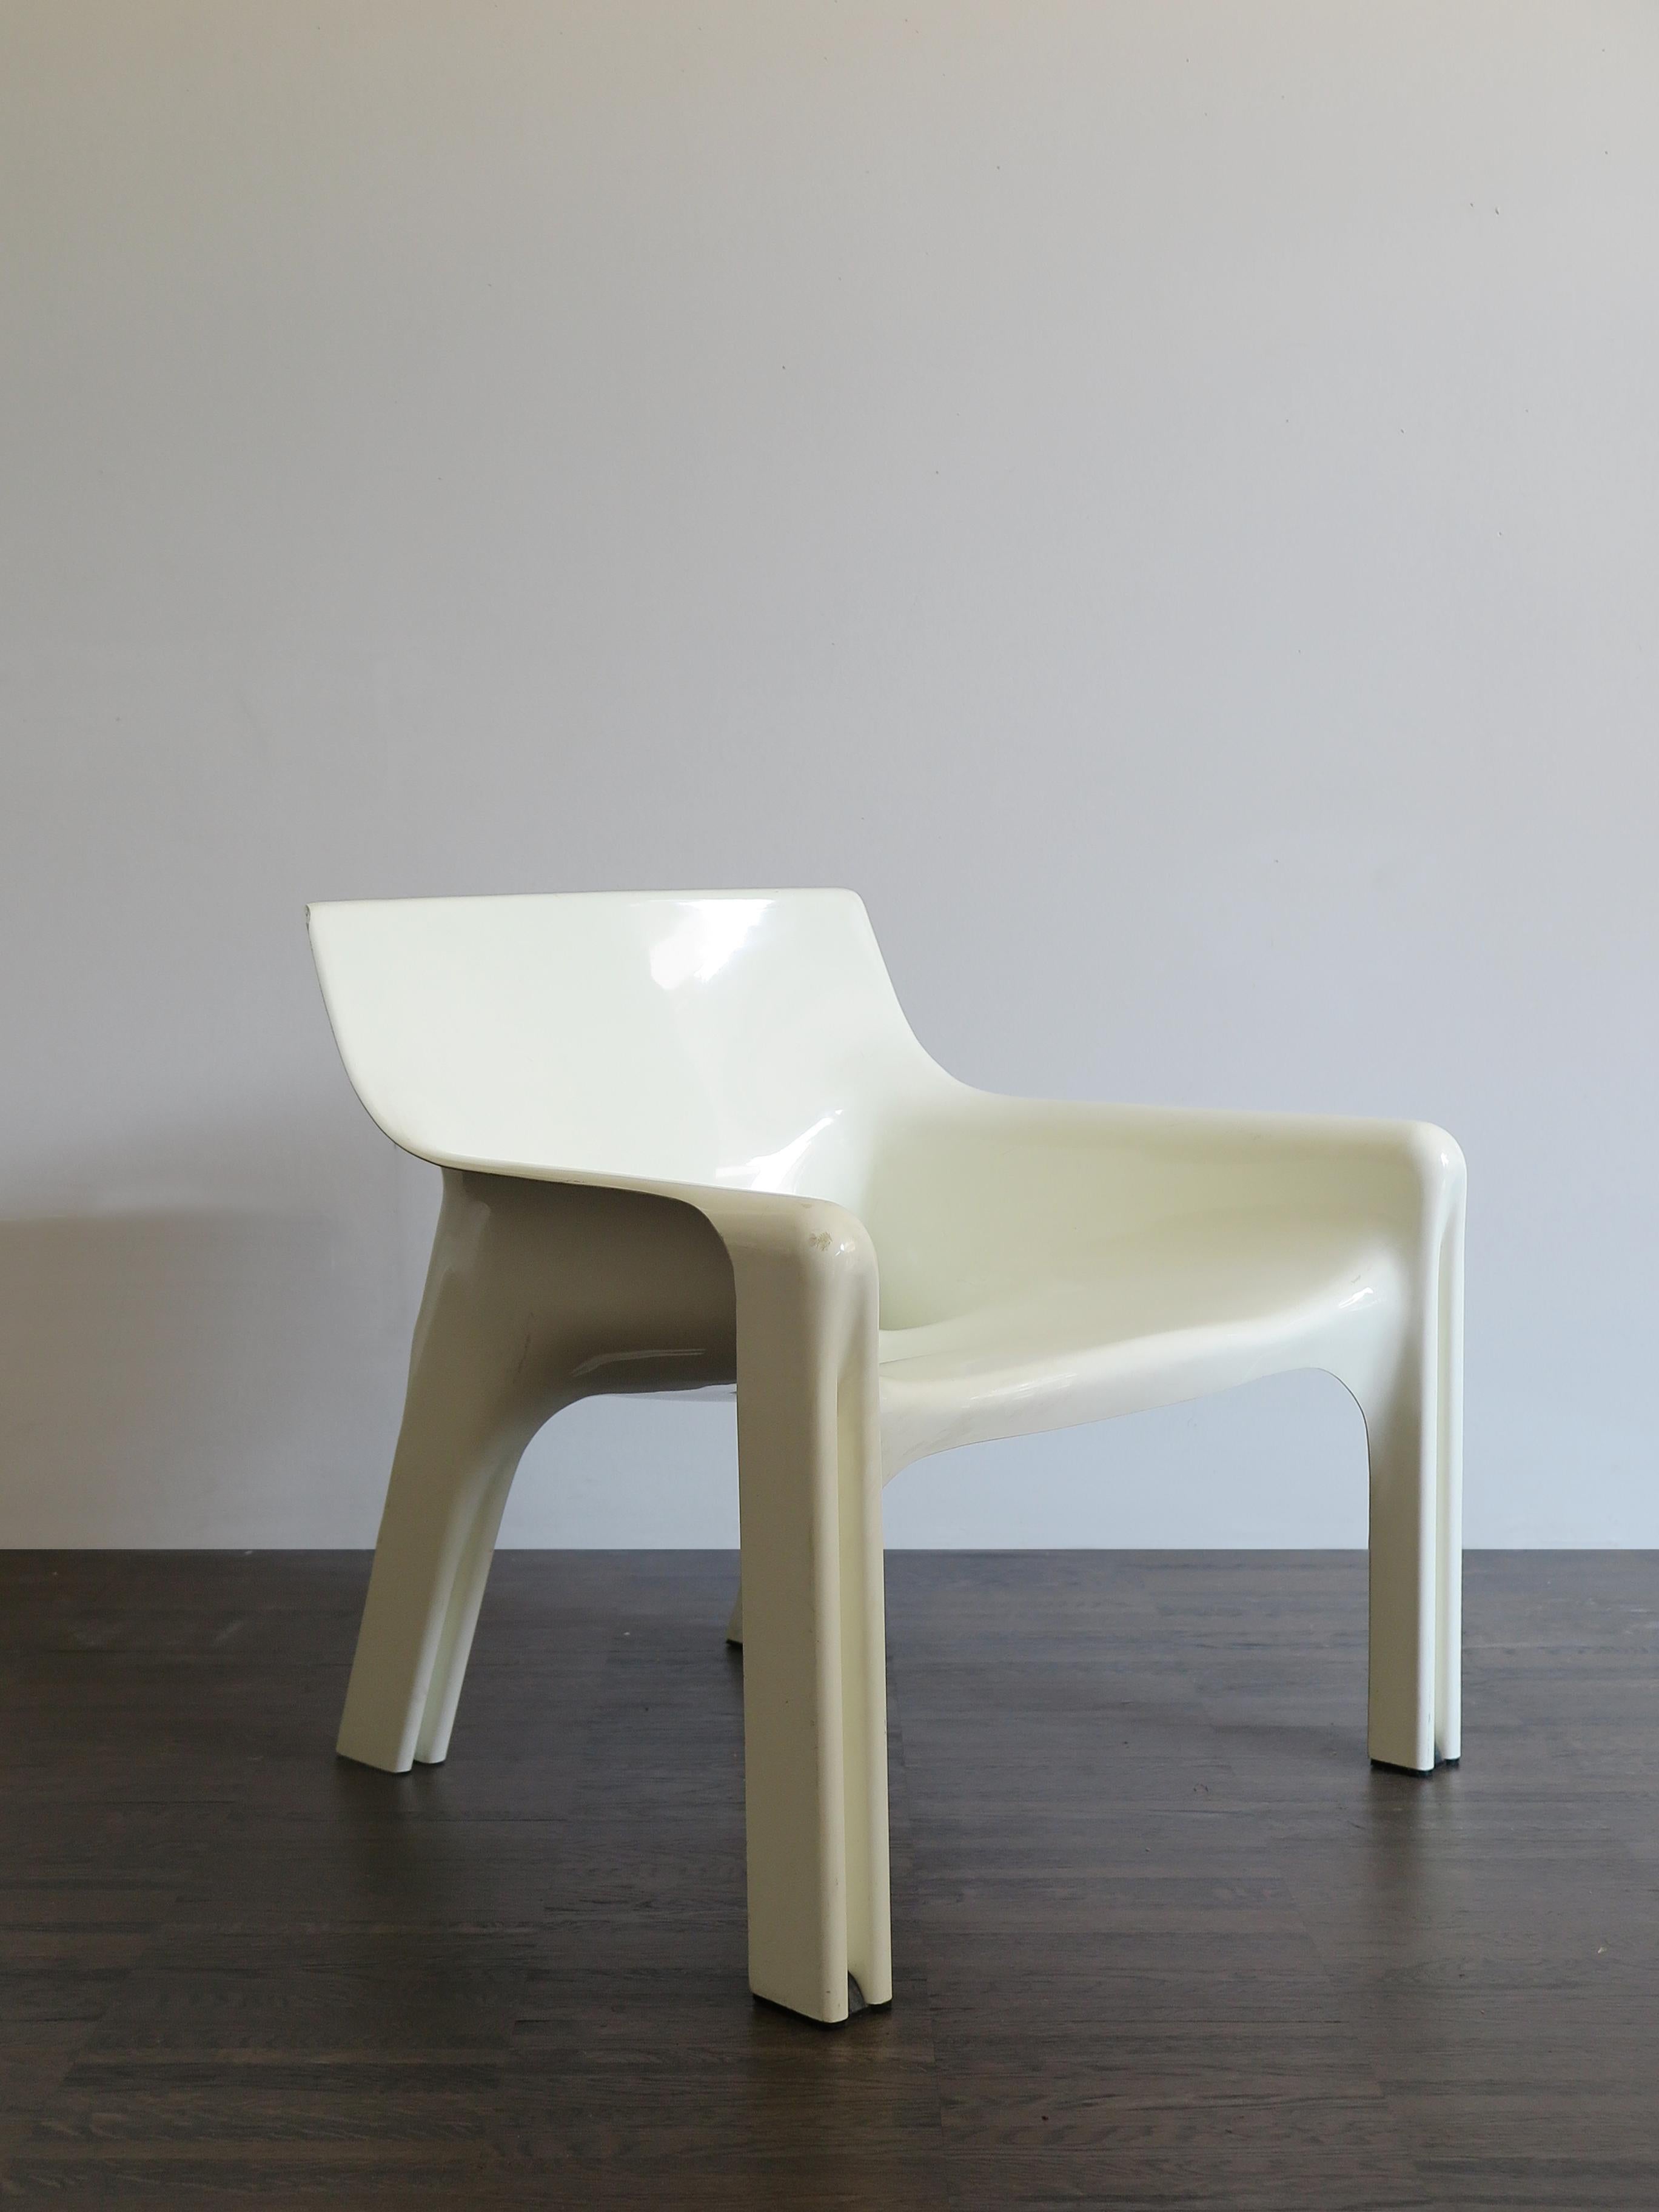 Italian plastic armchair model Vicario designed by Vico Magistretti for Artemide Milano, 1970s
Signed below.

Please note that the item is original of the period and this shows normal signs of age and use.